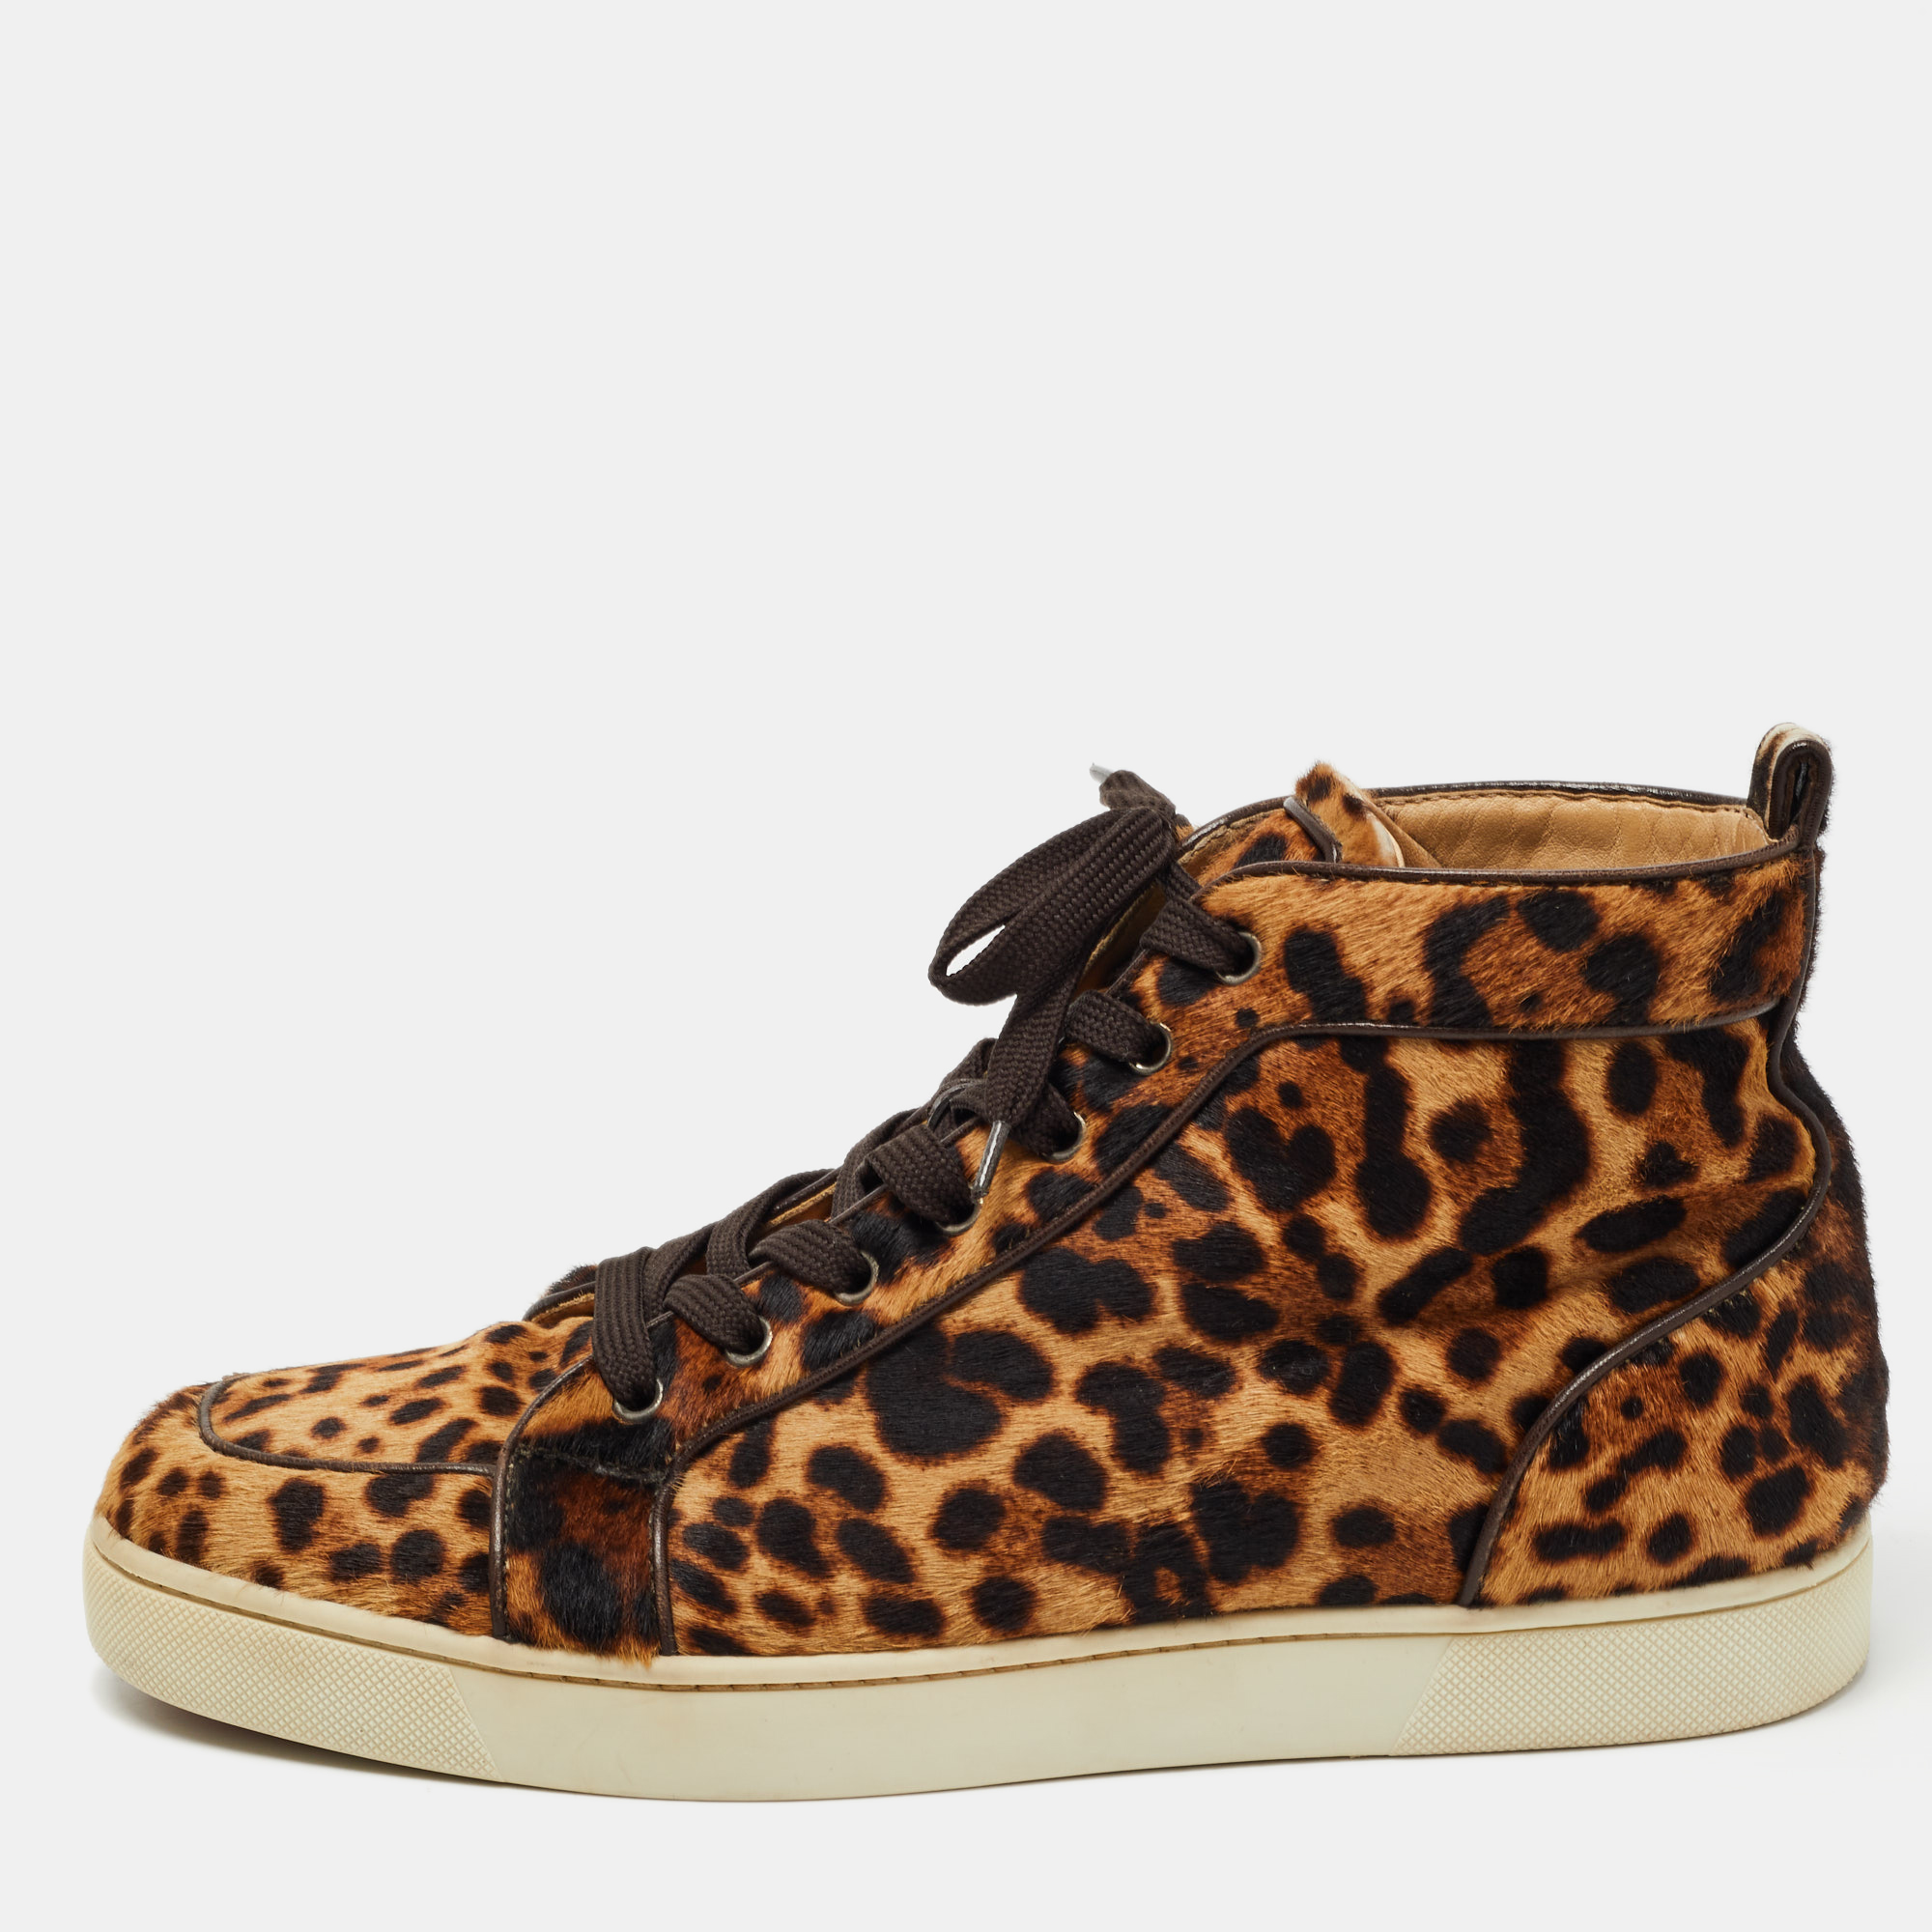 Pre-owned Christian Louboutin Two Tone Leopard Print Calf Hair Rantus Orlato High Top Sneakers Size 43